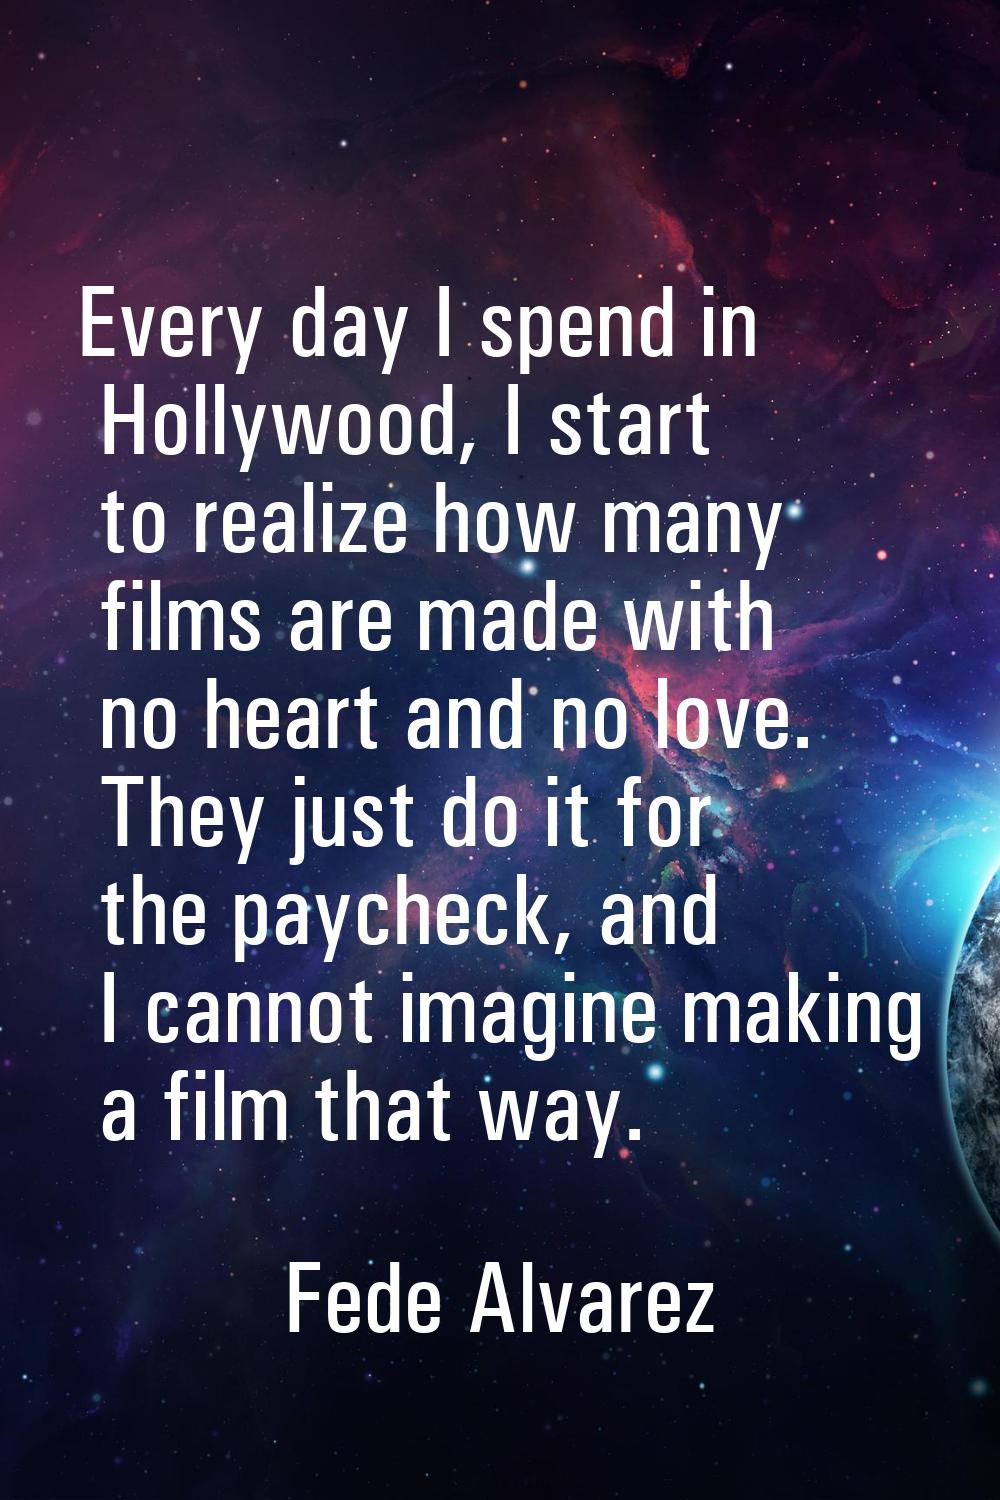 Every day I spend in Hollywood, I start to realize how many films are made with no heart and no lov